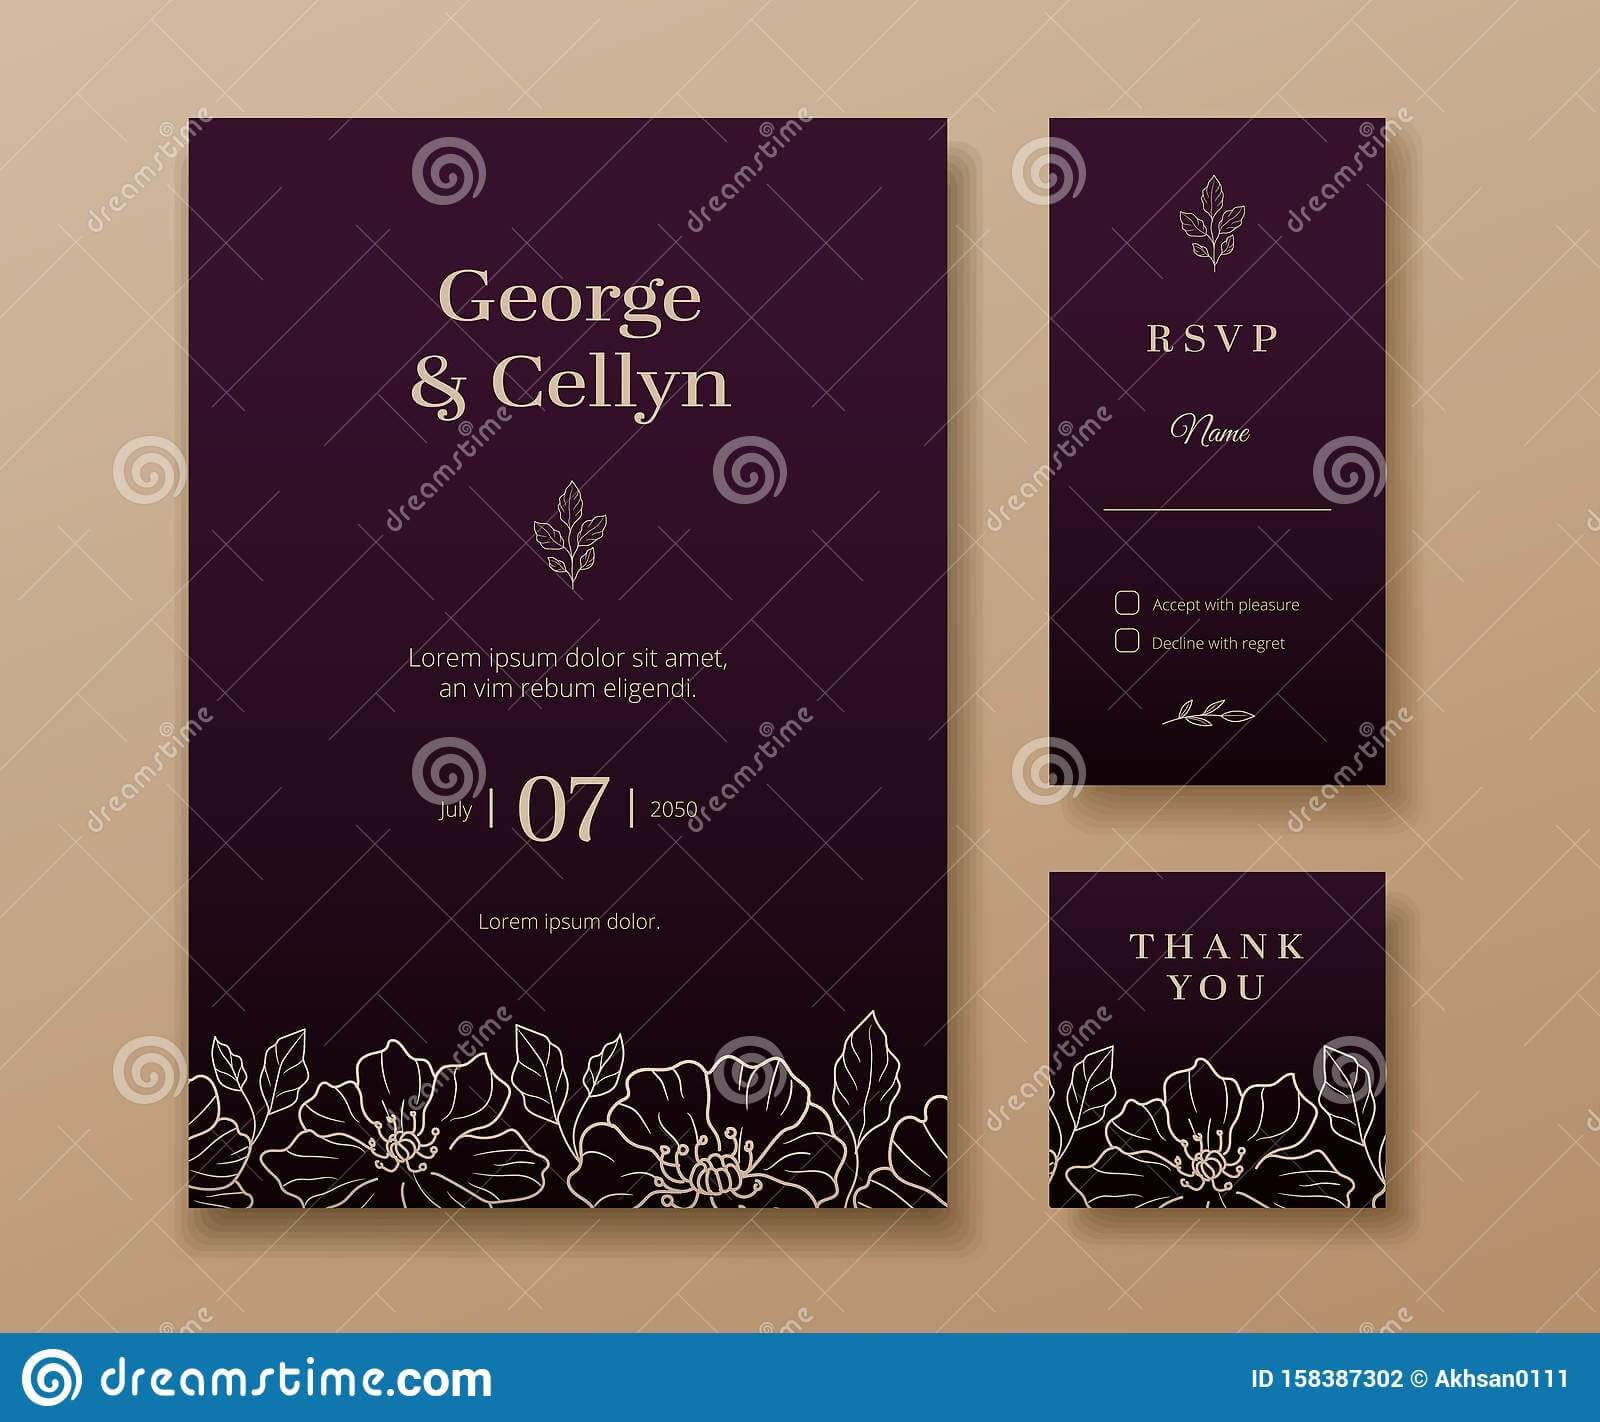 Modern Minimalist Floral Wedding And Event Invitation For Event Invitation Card Template